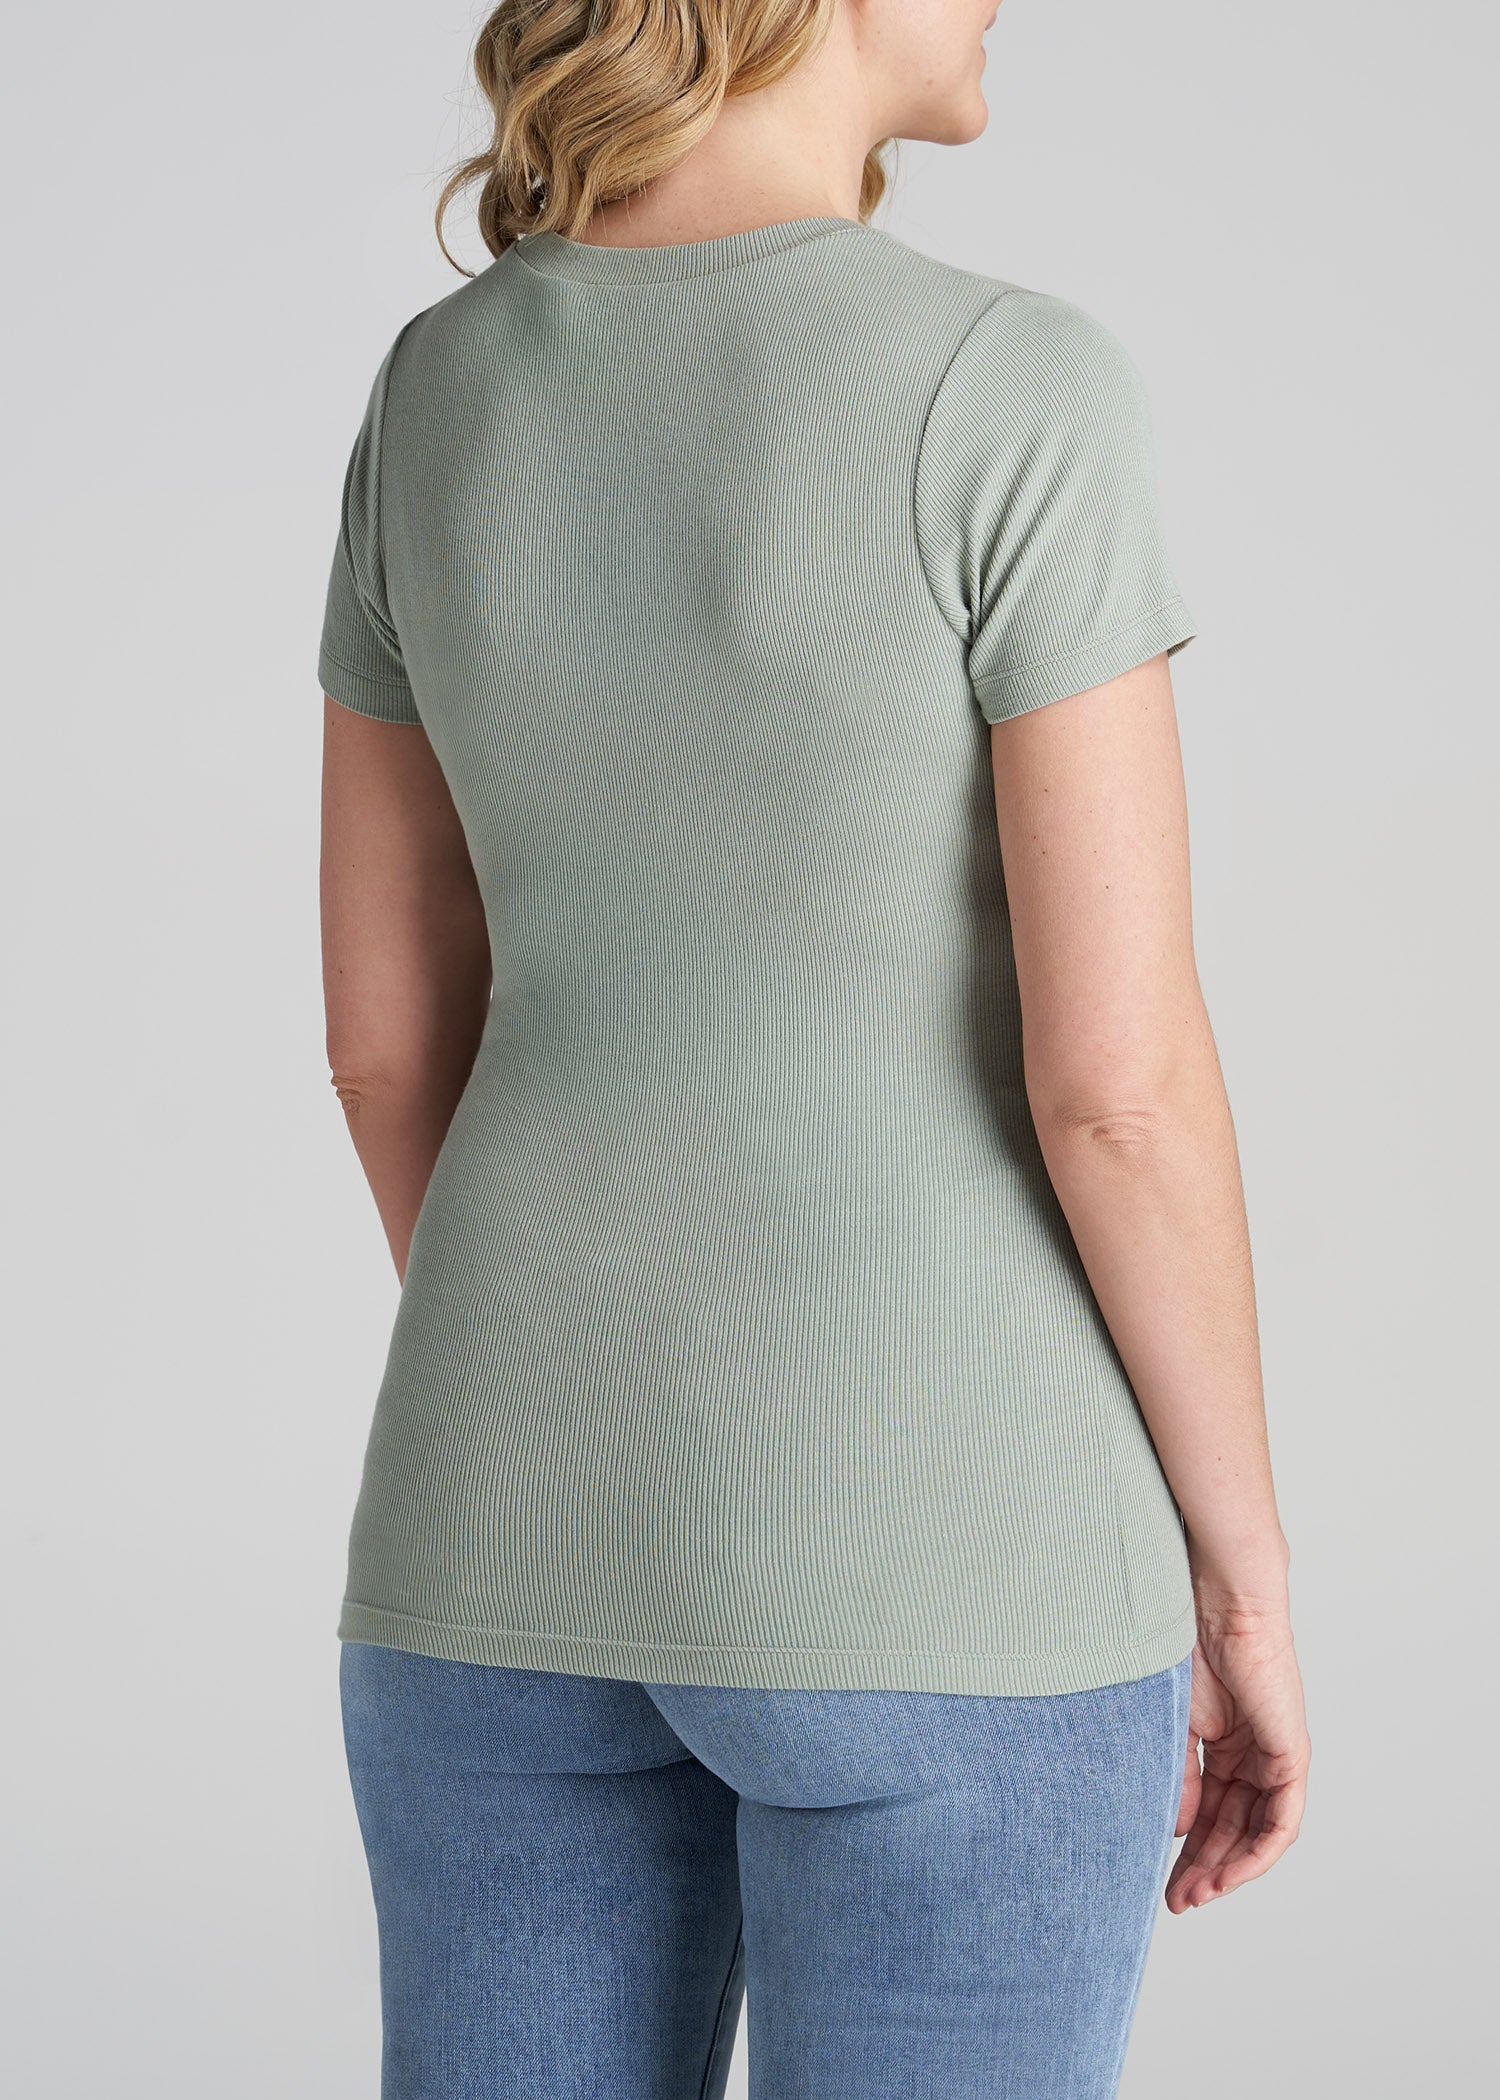 FITTED Ribbed Tee in Sage Green - Women's Tall T-Shirts